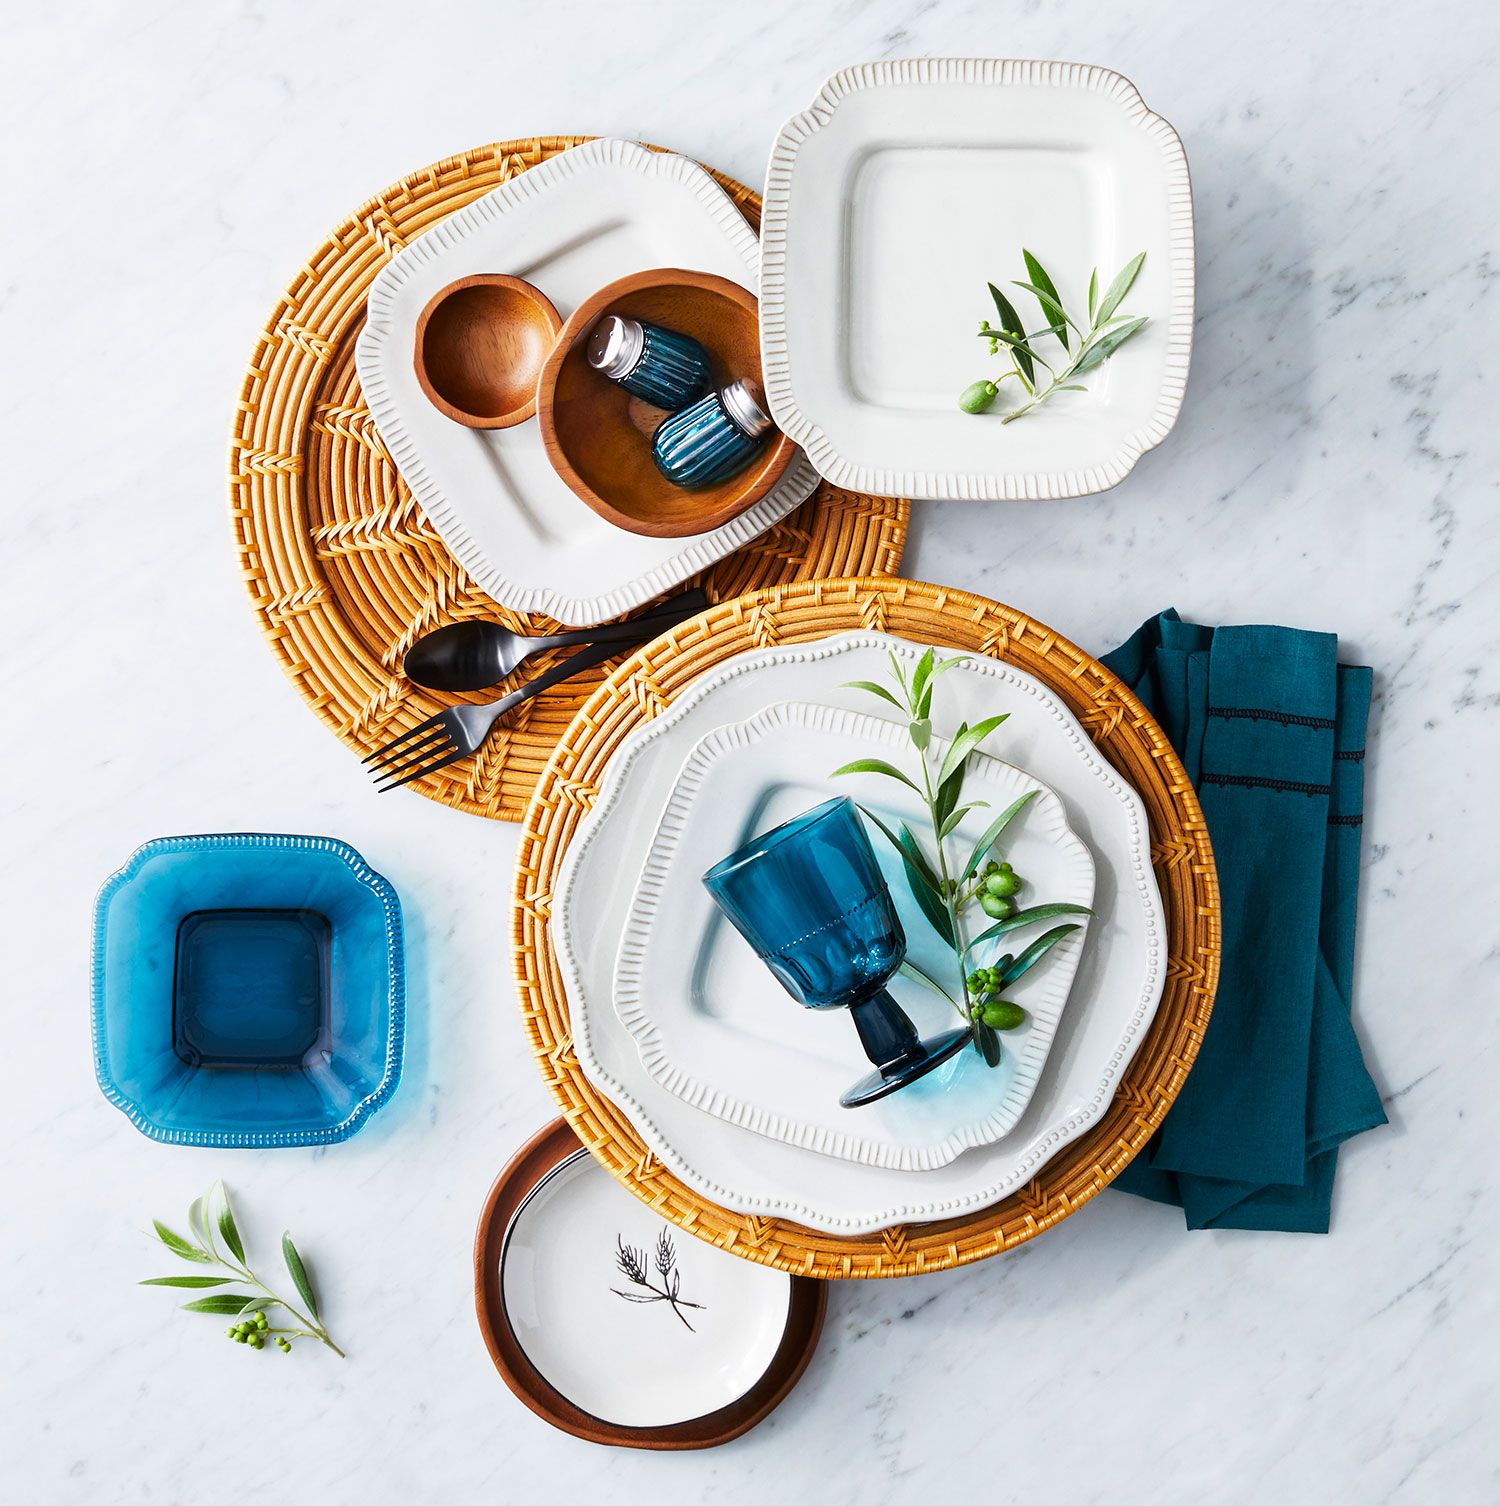 https://hips.hearstapps.com/hmg-prod/images/joanna-gaines-hearth-and-hand-fall-2018-target-dishes-1536683883.jpg